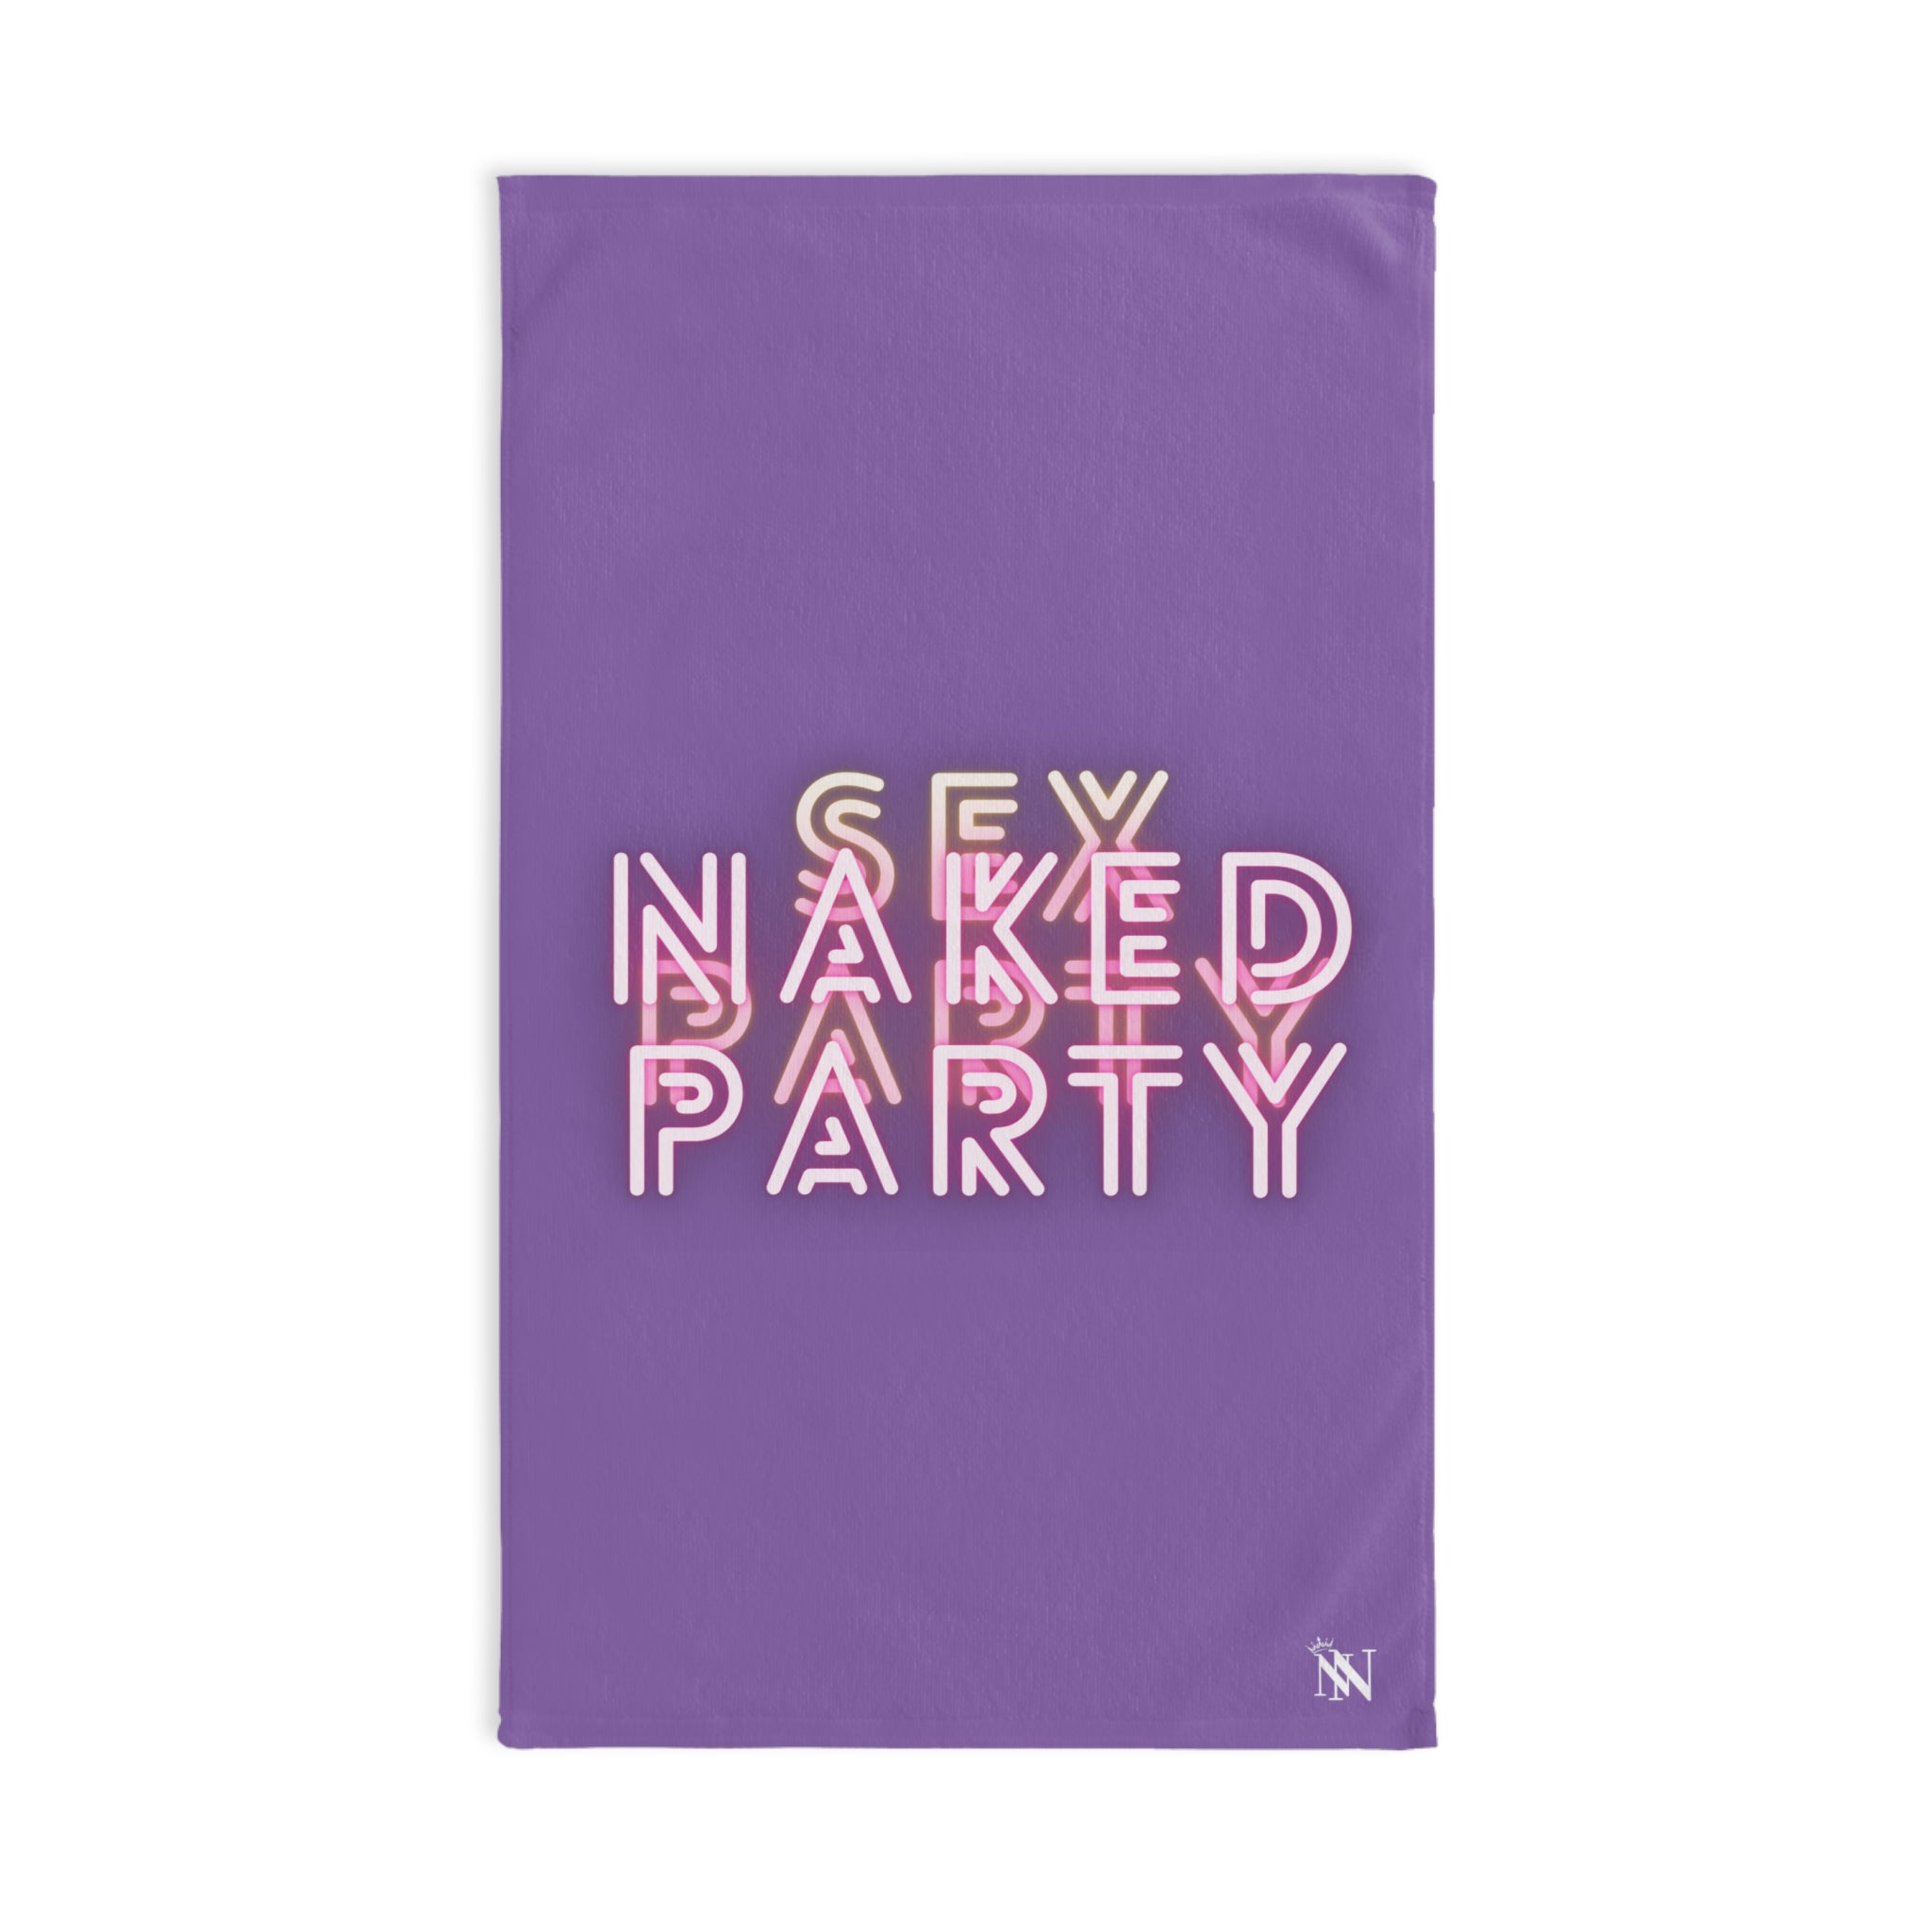 Naked  Party Lavendar | Funny Gifts for Men - Gifts for Him - Birthday Gifts for Men, Him, Husband, Boyfriend, New Couple Gifts, Fathers & Valentines Day Gifts, Hand Towels NECTAR NAPKINS